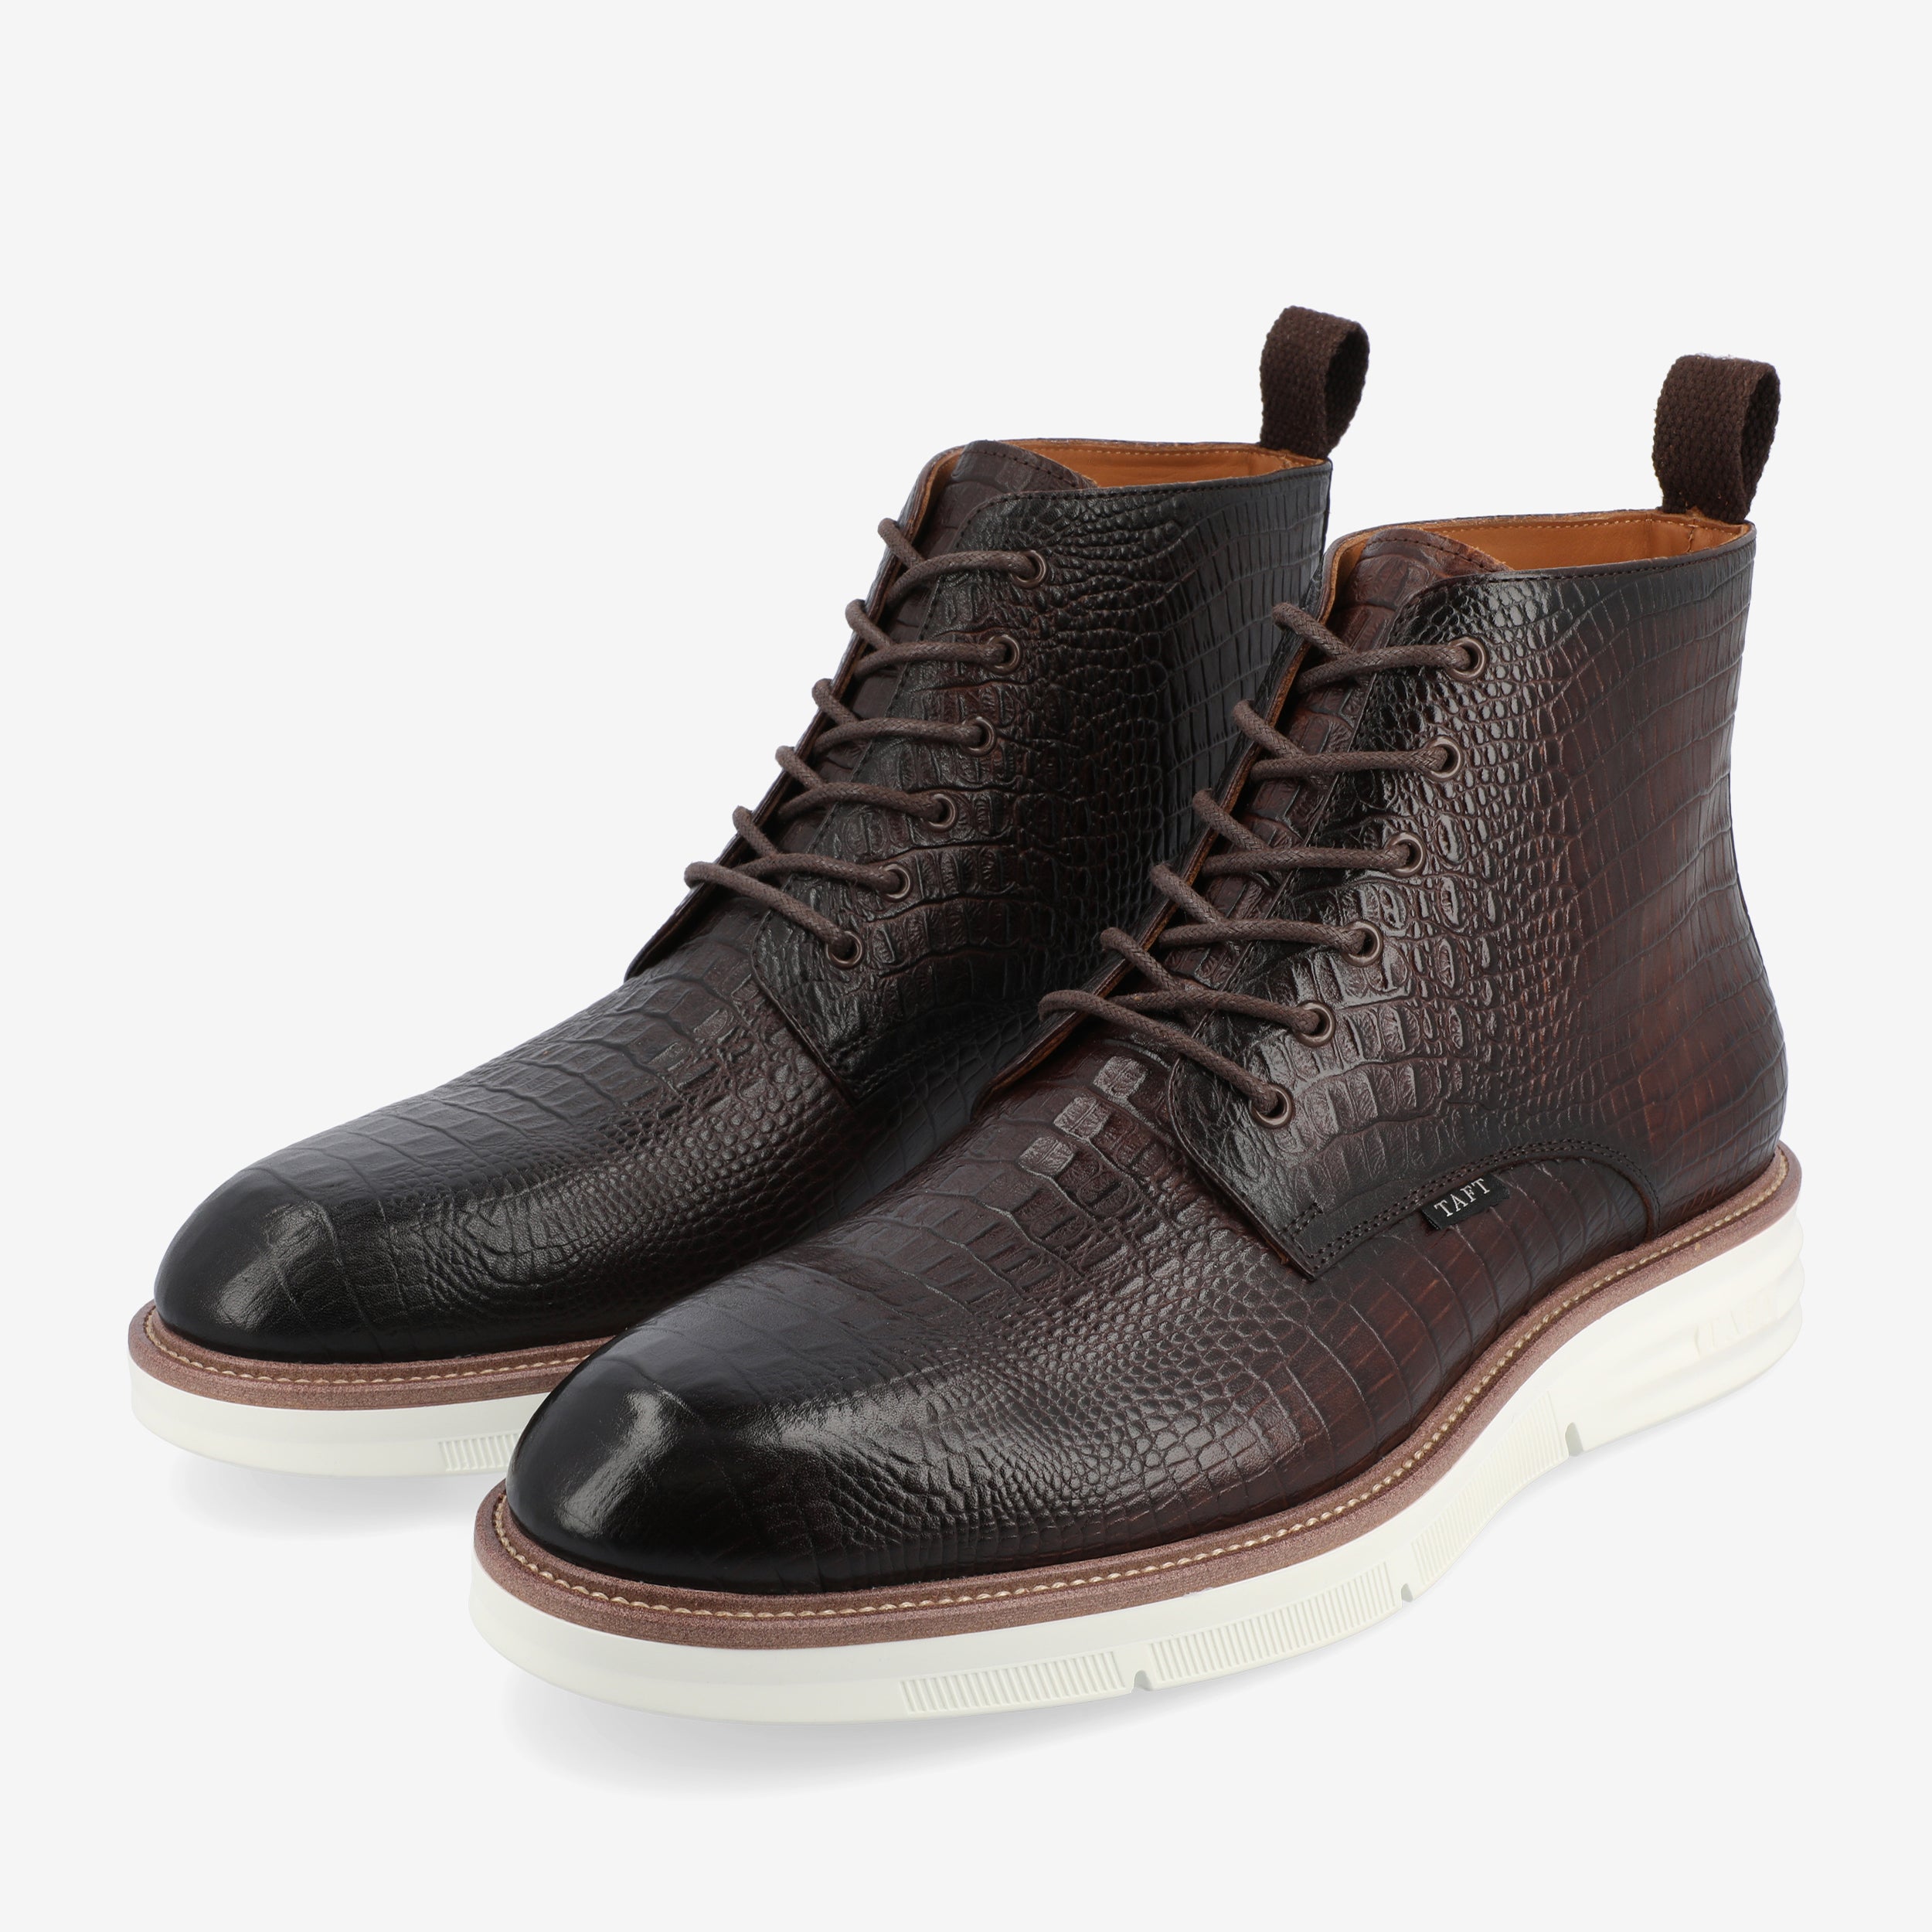 Model 009 Boot In Chocolate (Final Sale)